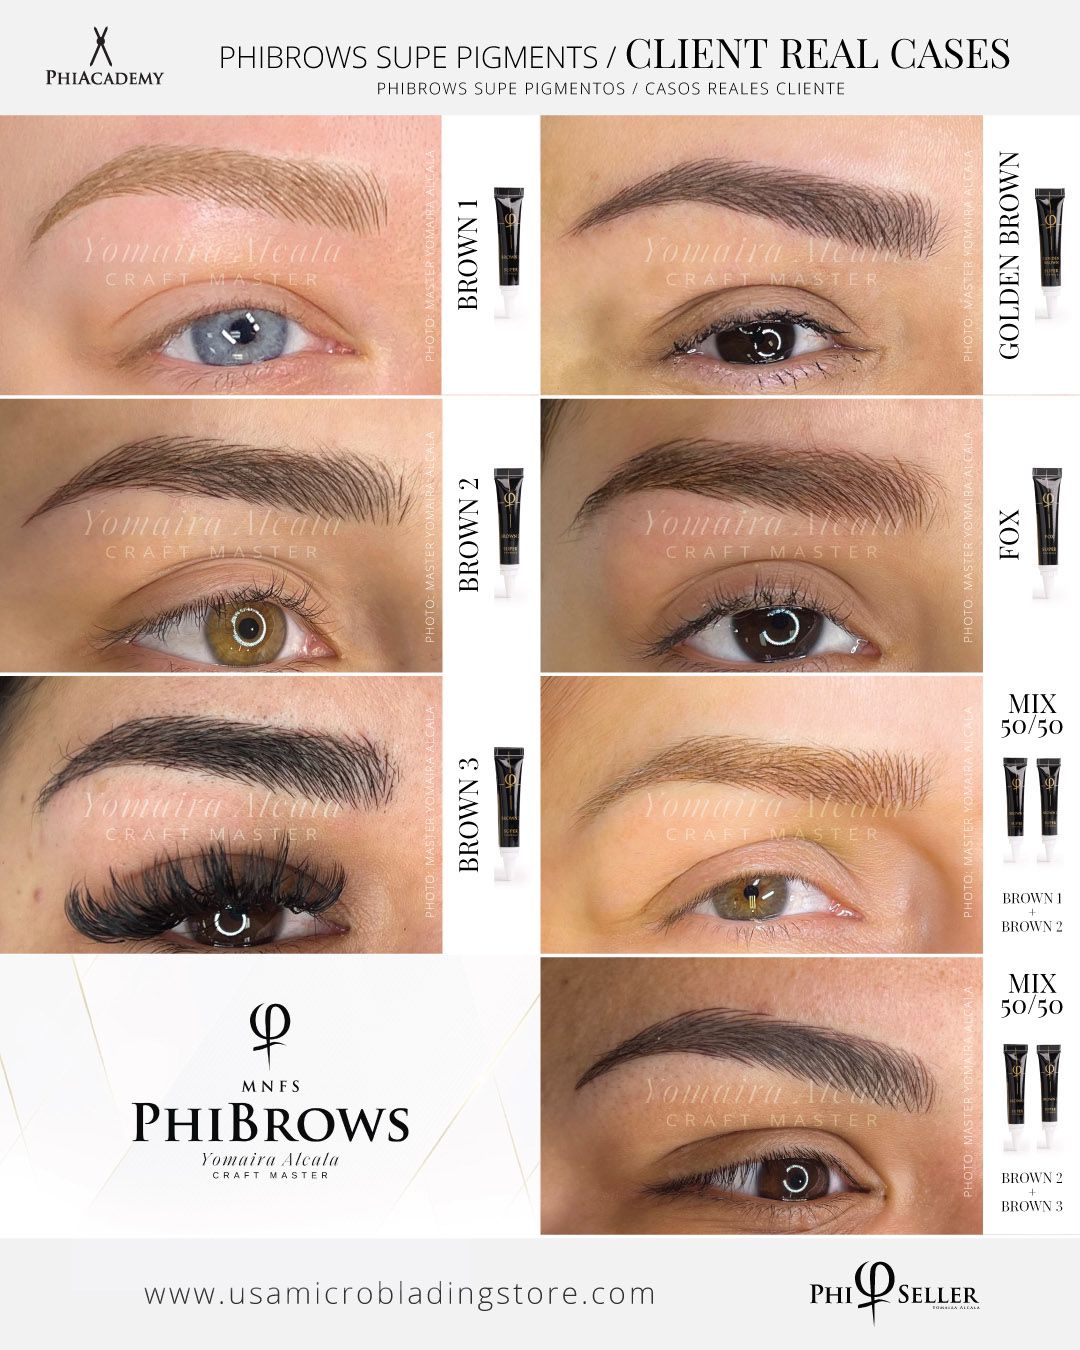 PhiBrows Microblading Basic Pigment Collection SUPER